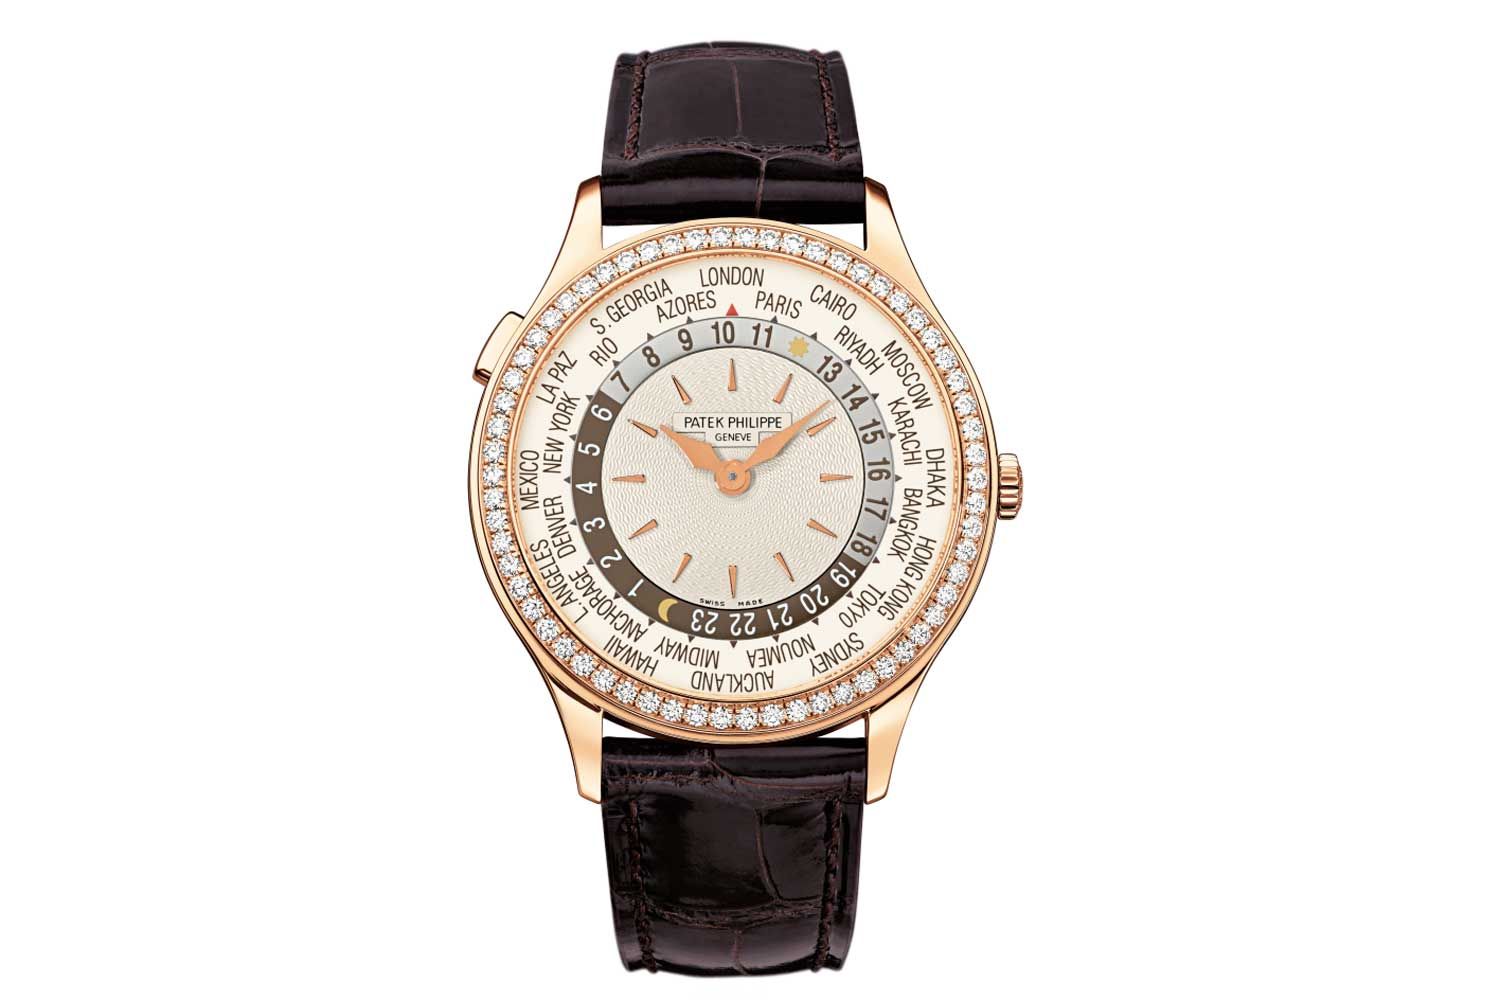 The first version of ref. 7130 with a rose gold case, an ivory hand-guilloché dial and a warm brown 24-hour ring and matching brown print on the city disk. (Image: Patek Philippe)